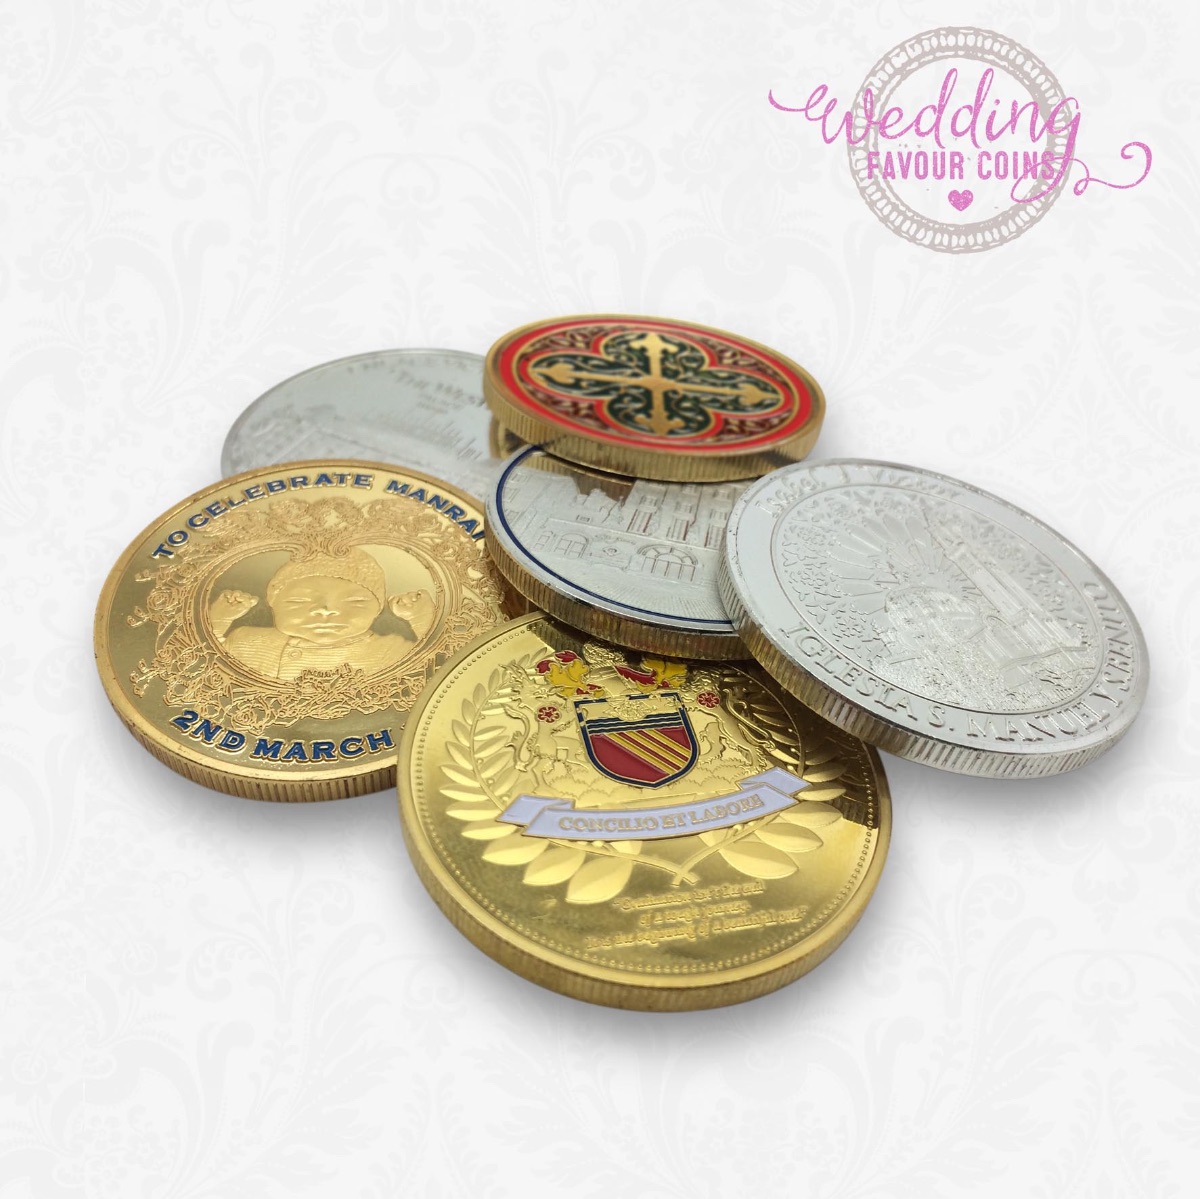 The Wedding Favour Coins-Image-14